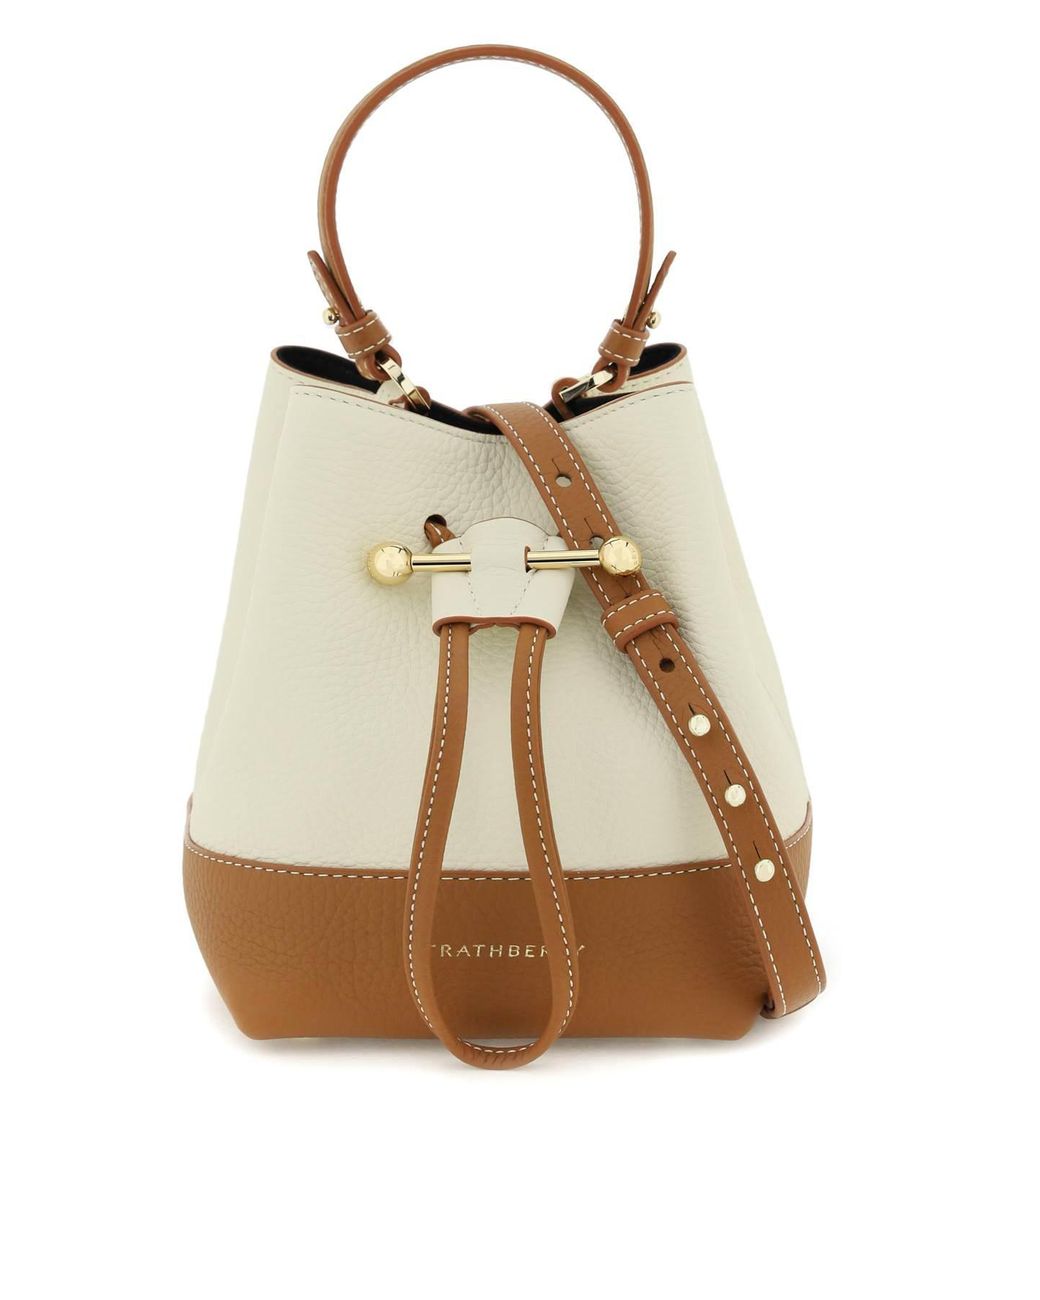 Strathberry - Lana Osette - Leather Mini Bucket Bag - Natural / Brown